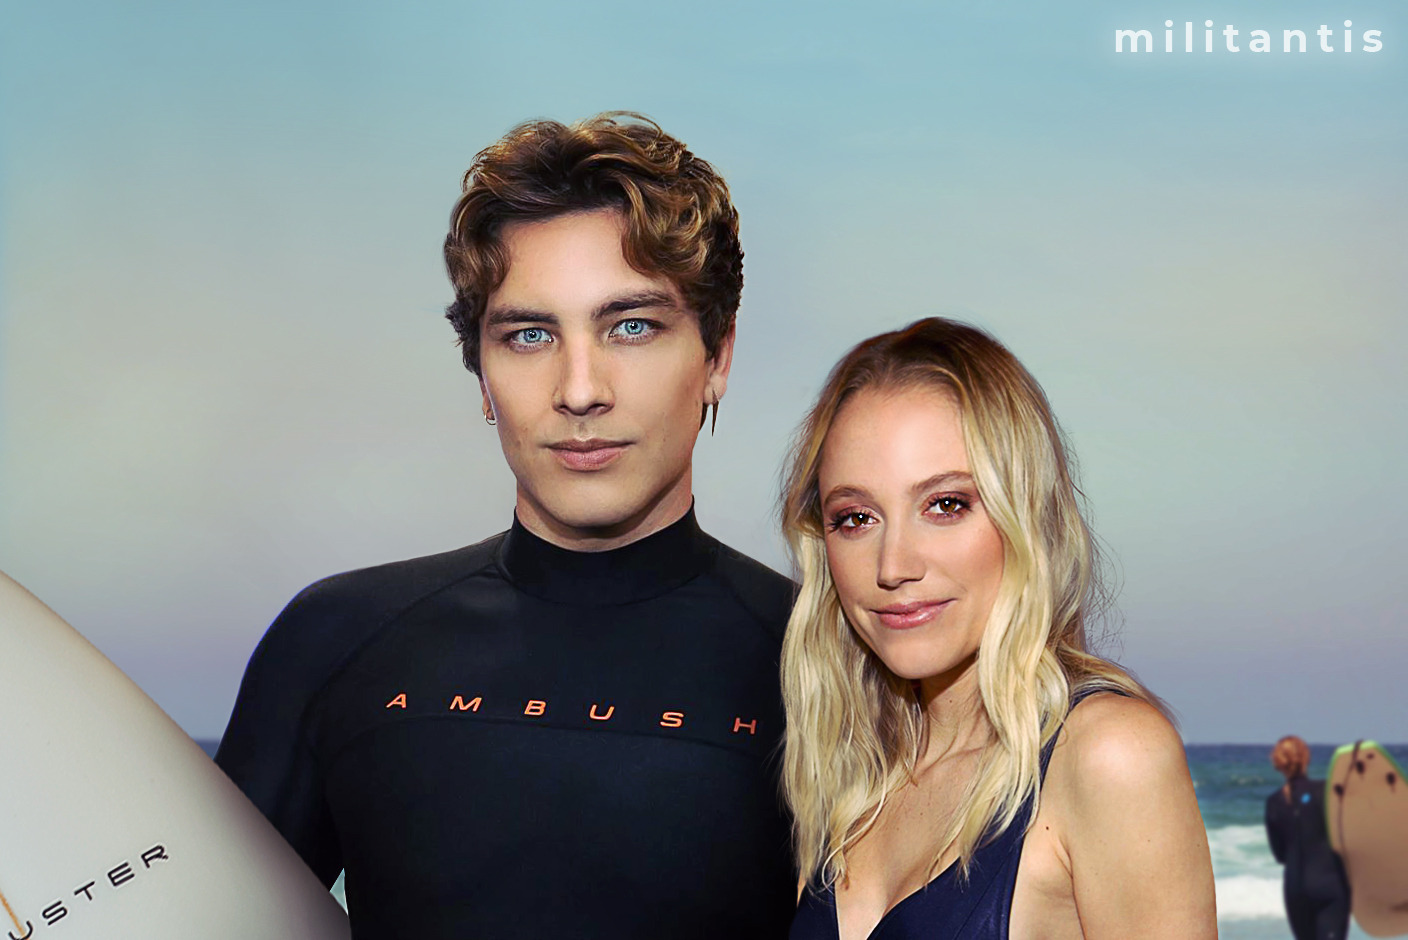 Cody fern dating who is Is Cody